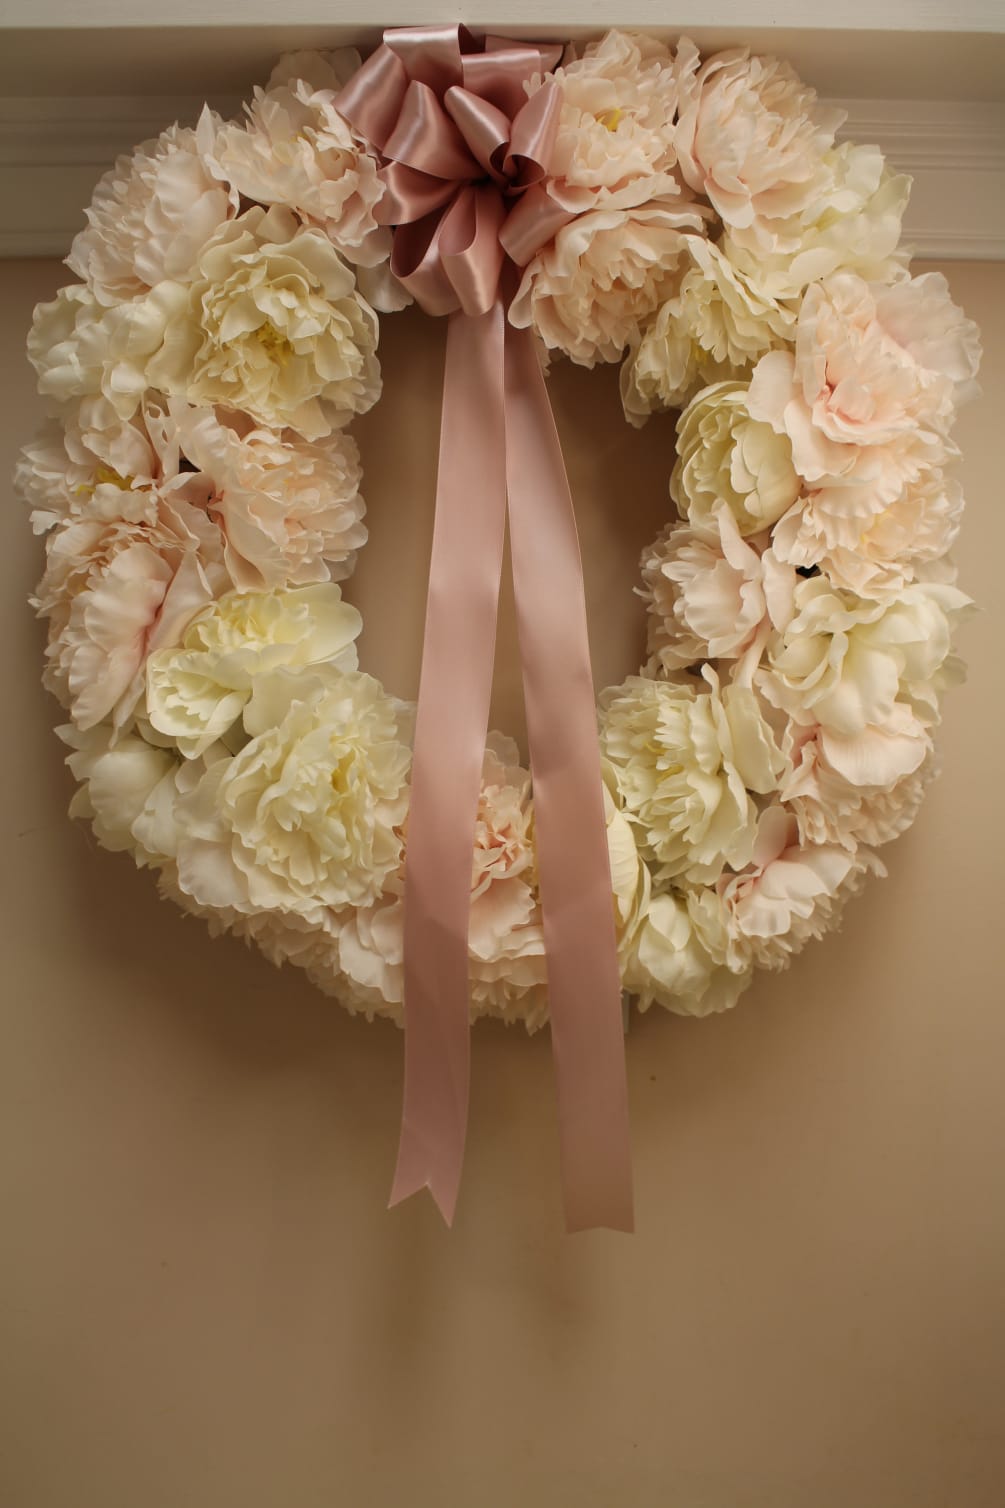 Lush and full, this hydrangea wreath is the perfect